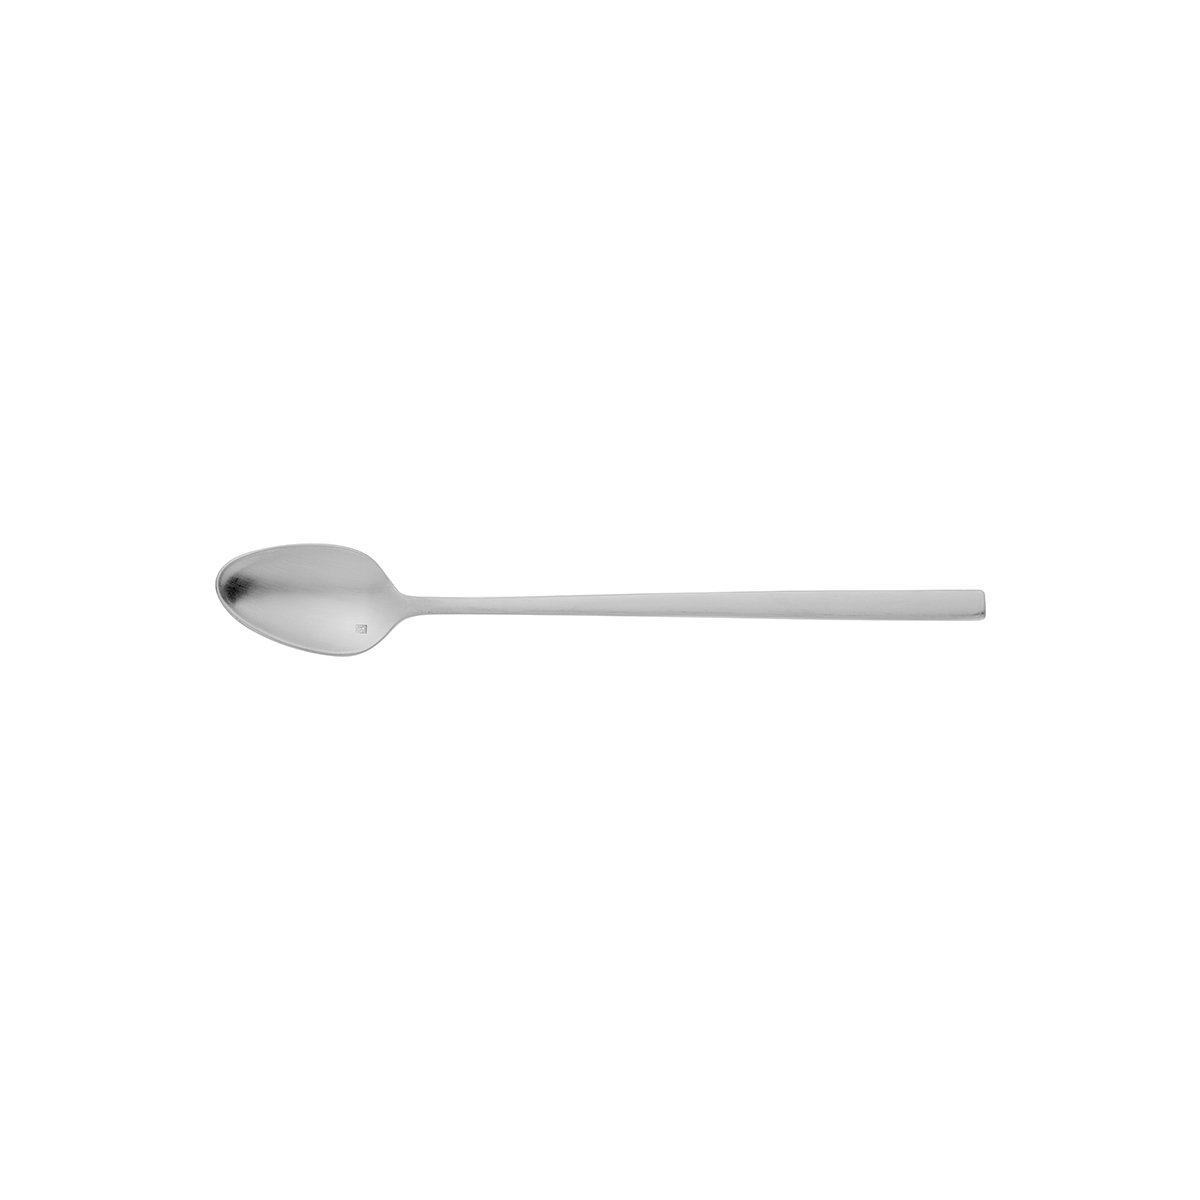 Soda Spoon - Titan Arezzo Brushed from Fortessa. made out of Stainless Steel and sold in boxes of 12. Hospitality quality at wholesale price with The Flying Fork! 